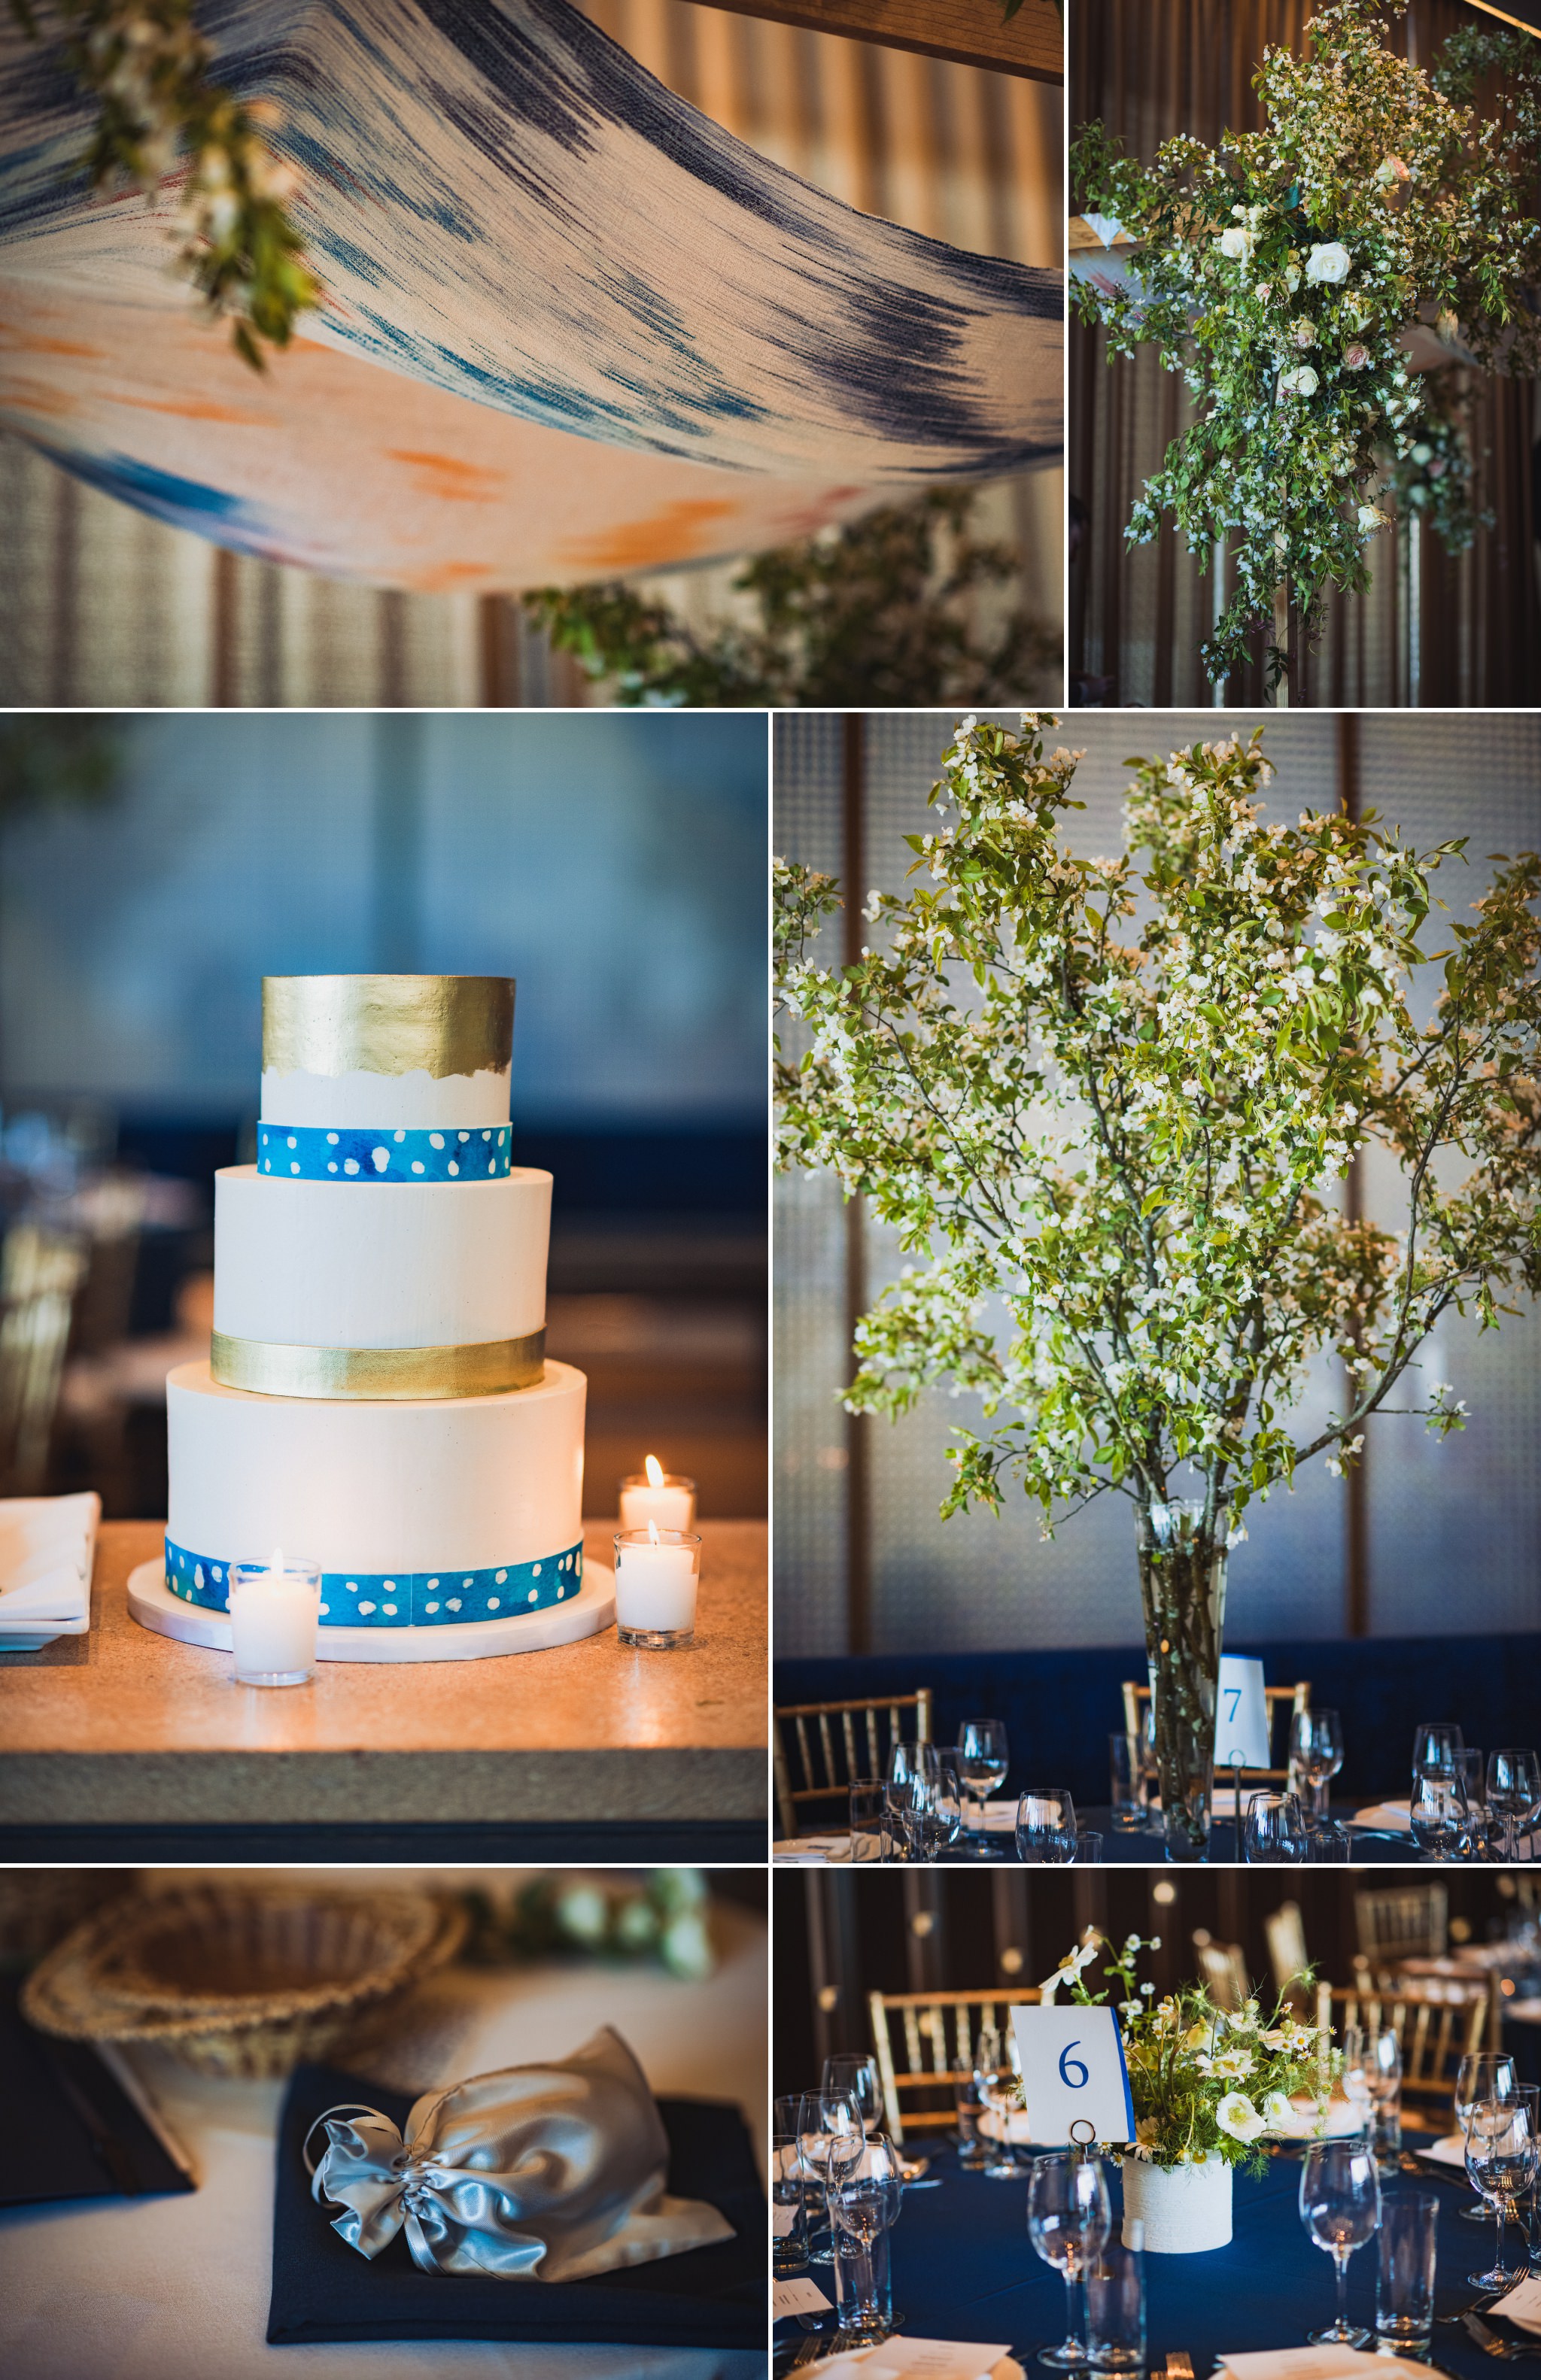  some of the details from Brian and Scott's wedding at Riverpark NYC. I love the cake from Empire Cakes, as well as the venue design. Details are important for embellishing additional color to the story of your day, helping to set the tone of sophist